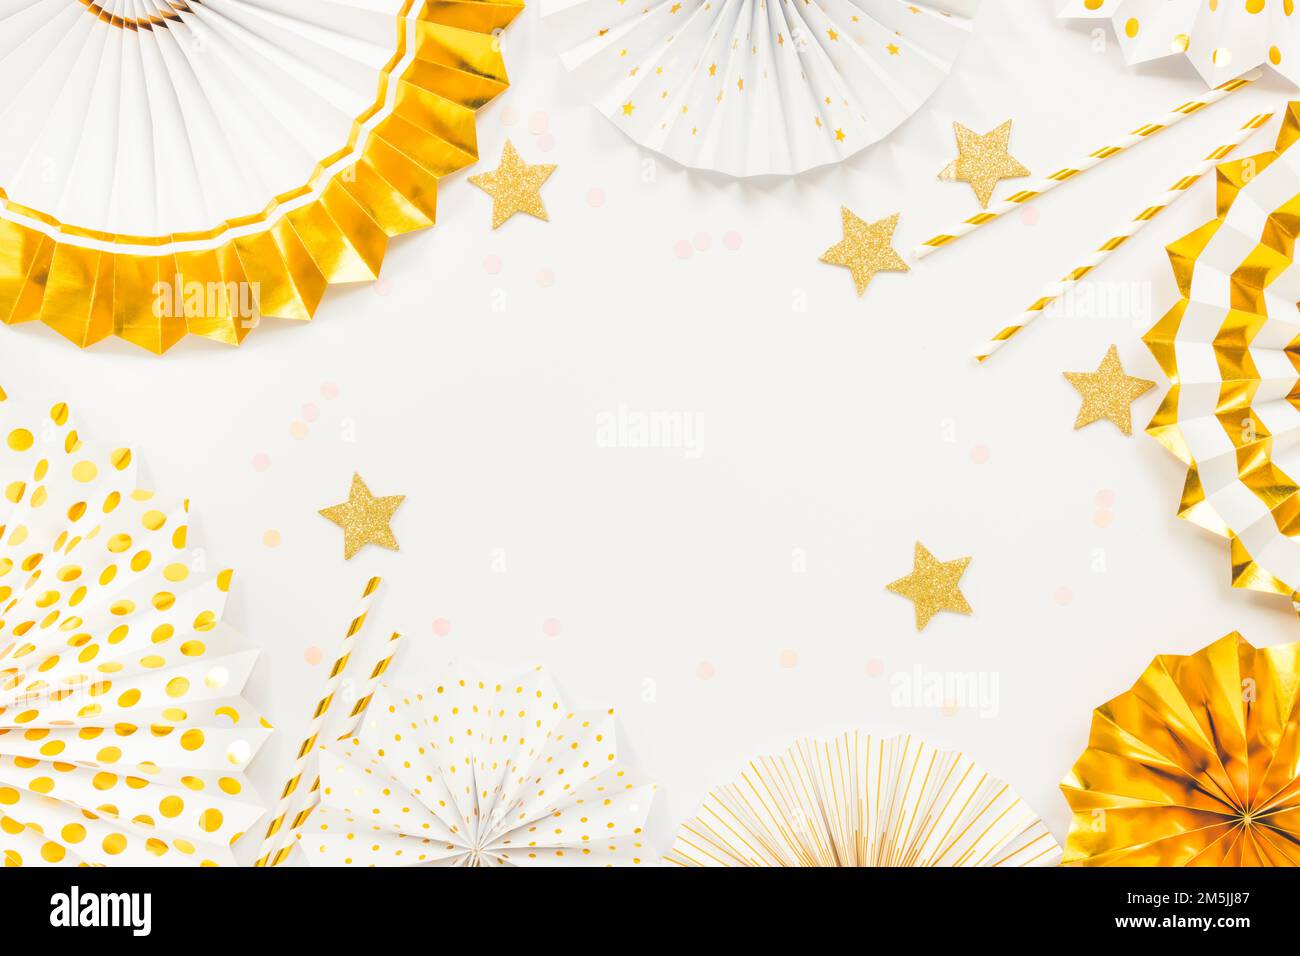 Party  background with paper fans, party decoration, party celebration in white and golden tone Stock Photo